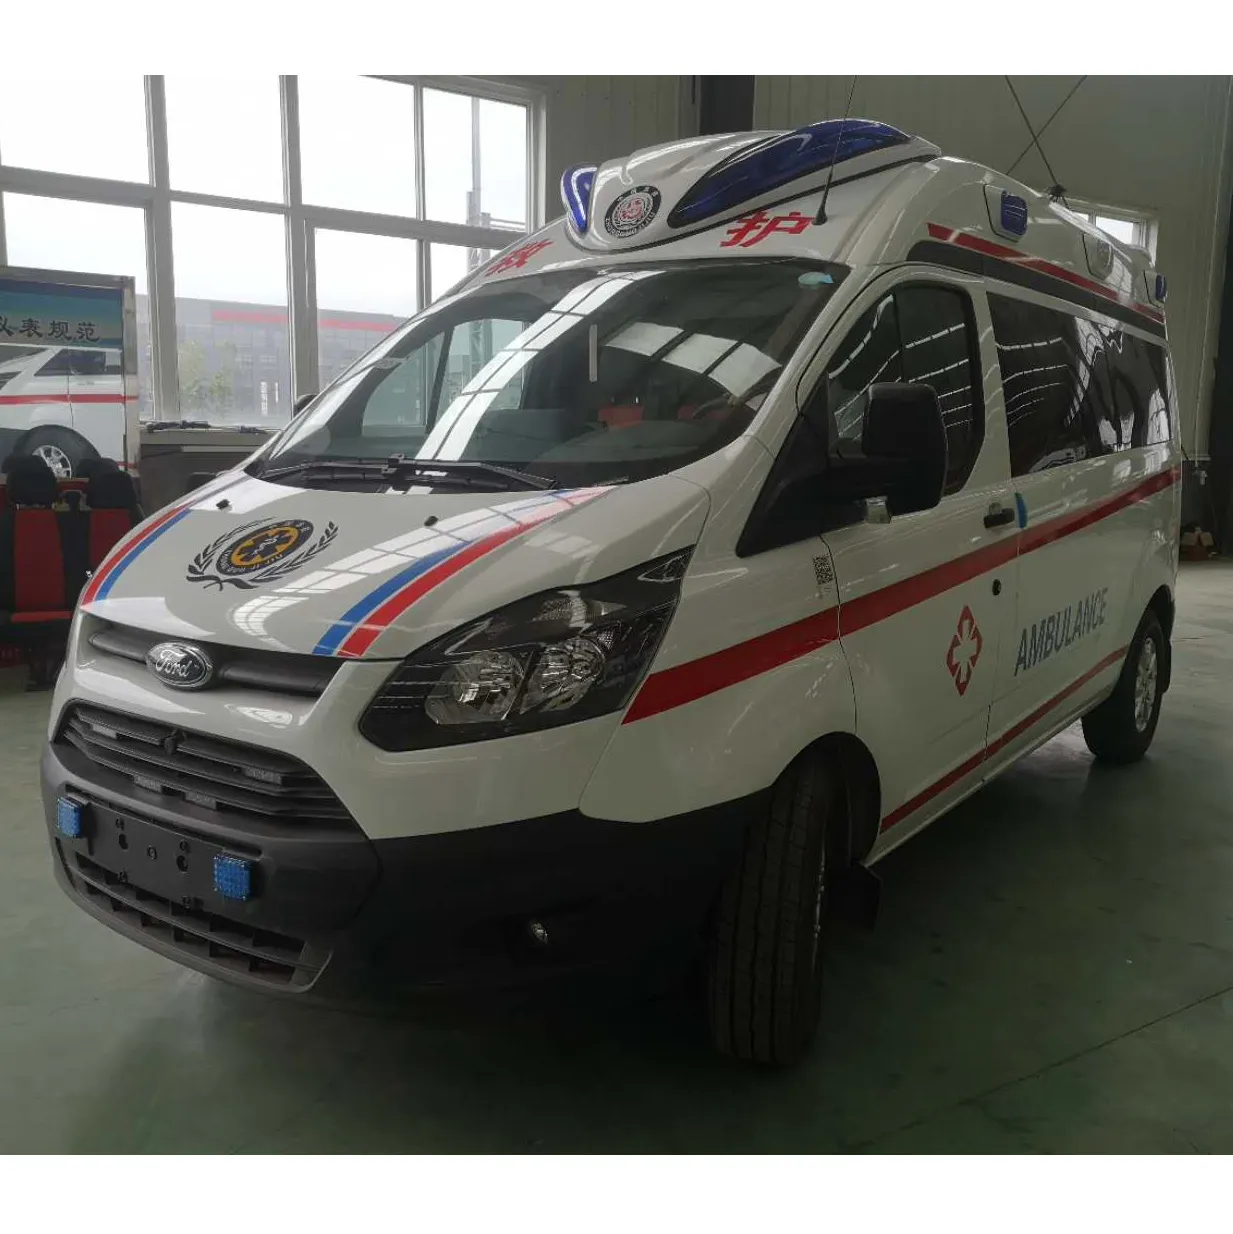 Atient ranransport Vehicle mermergent edical escuescue mmbulance